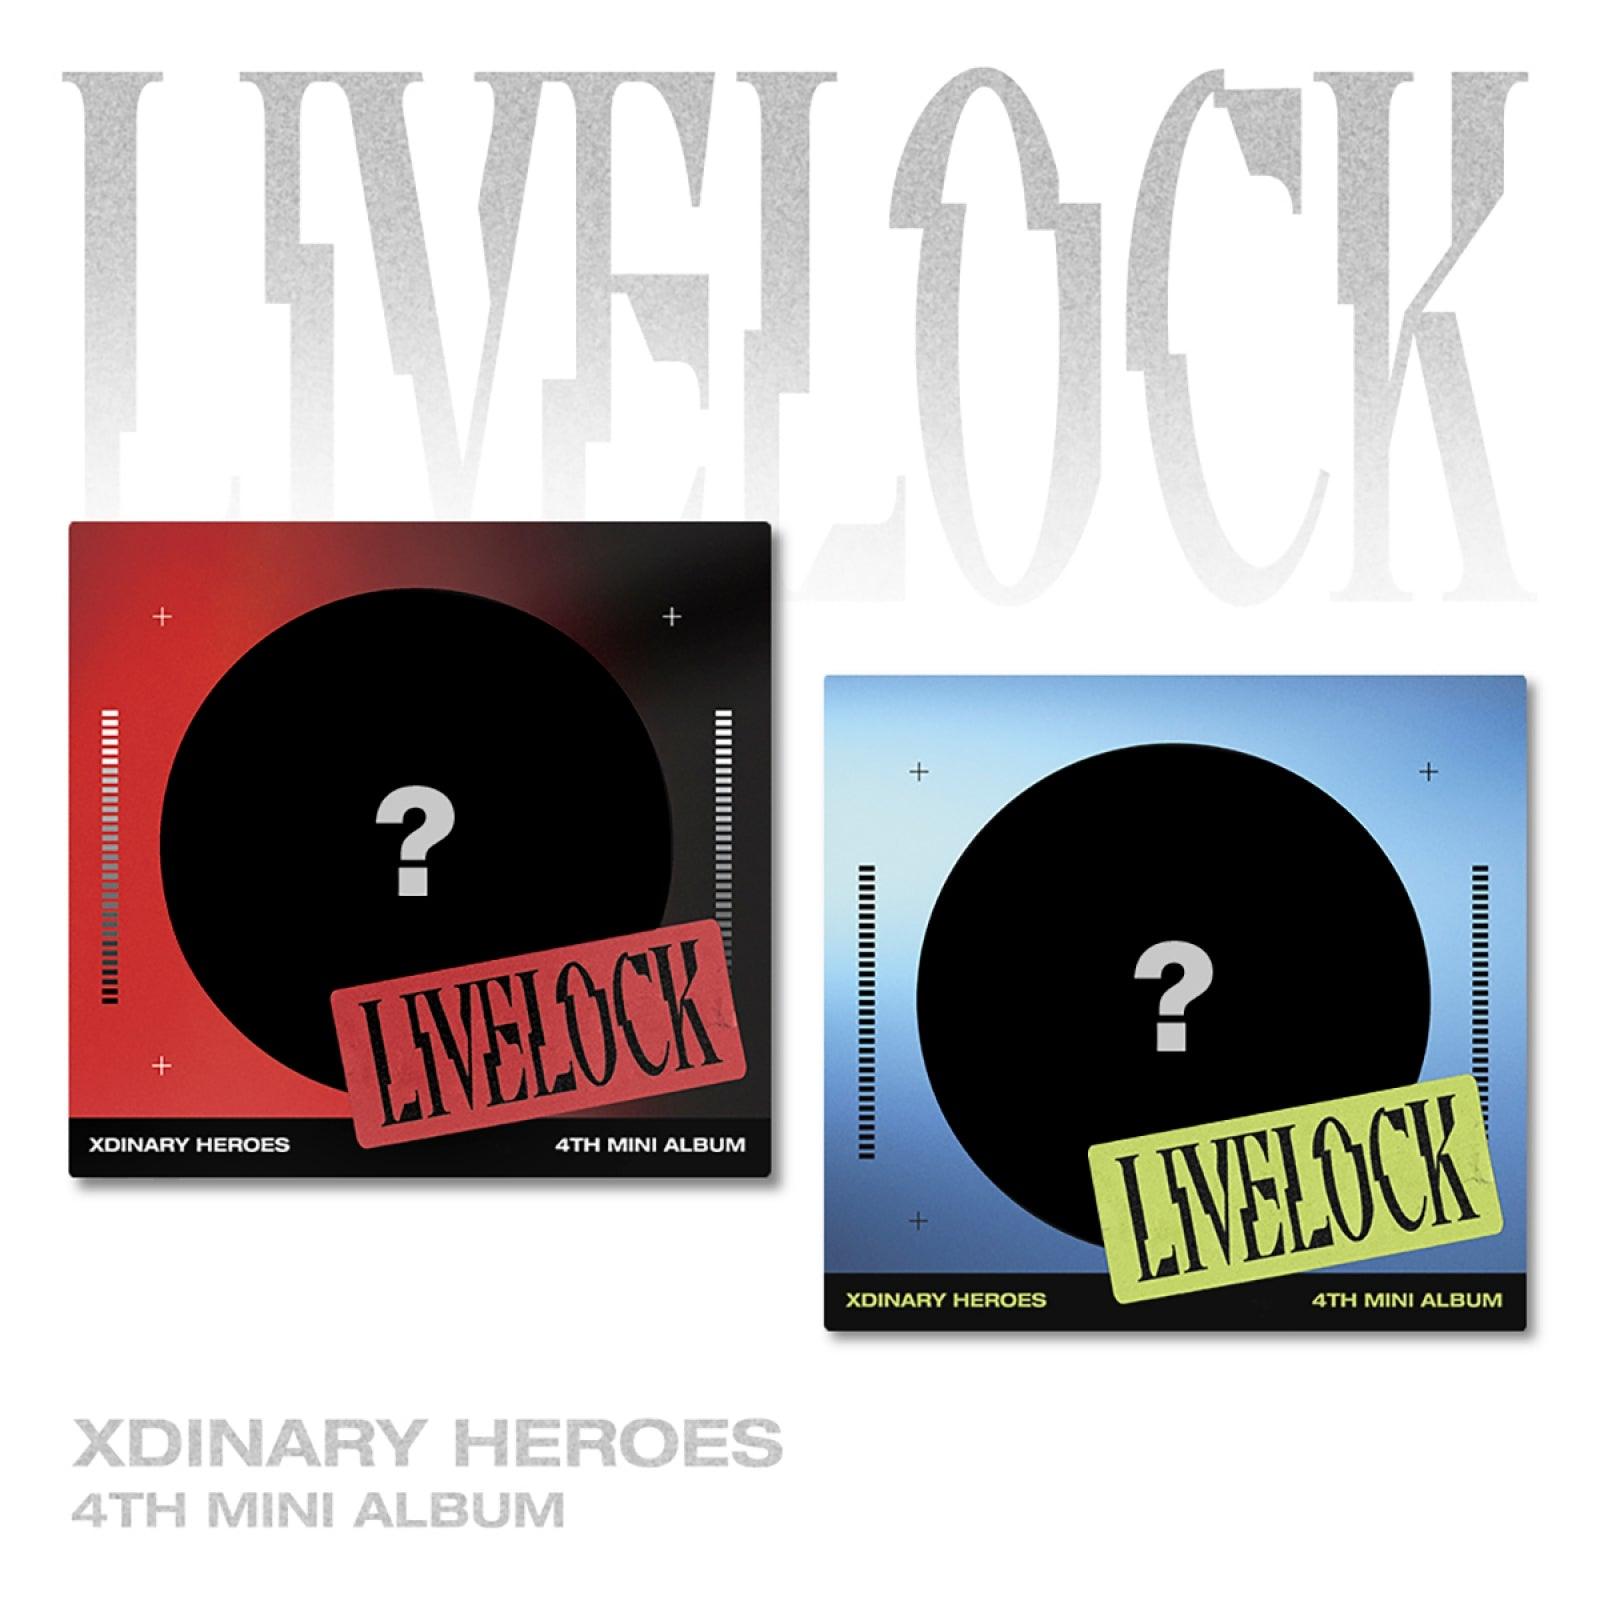 [PRE-ORDER] XDINARY-HEROES LIVELOCK 4TH MINI ALBUM (DIGIPACK VER.) - Shopping Around the World with Goodsnjoy